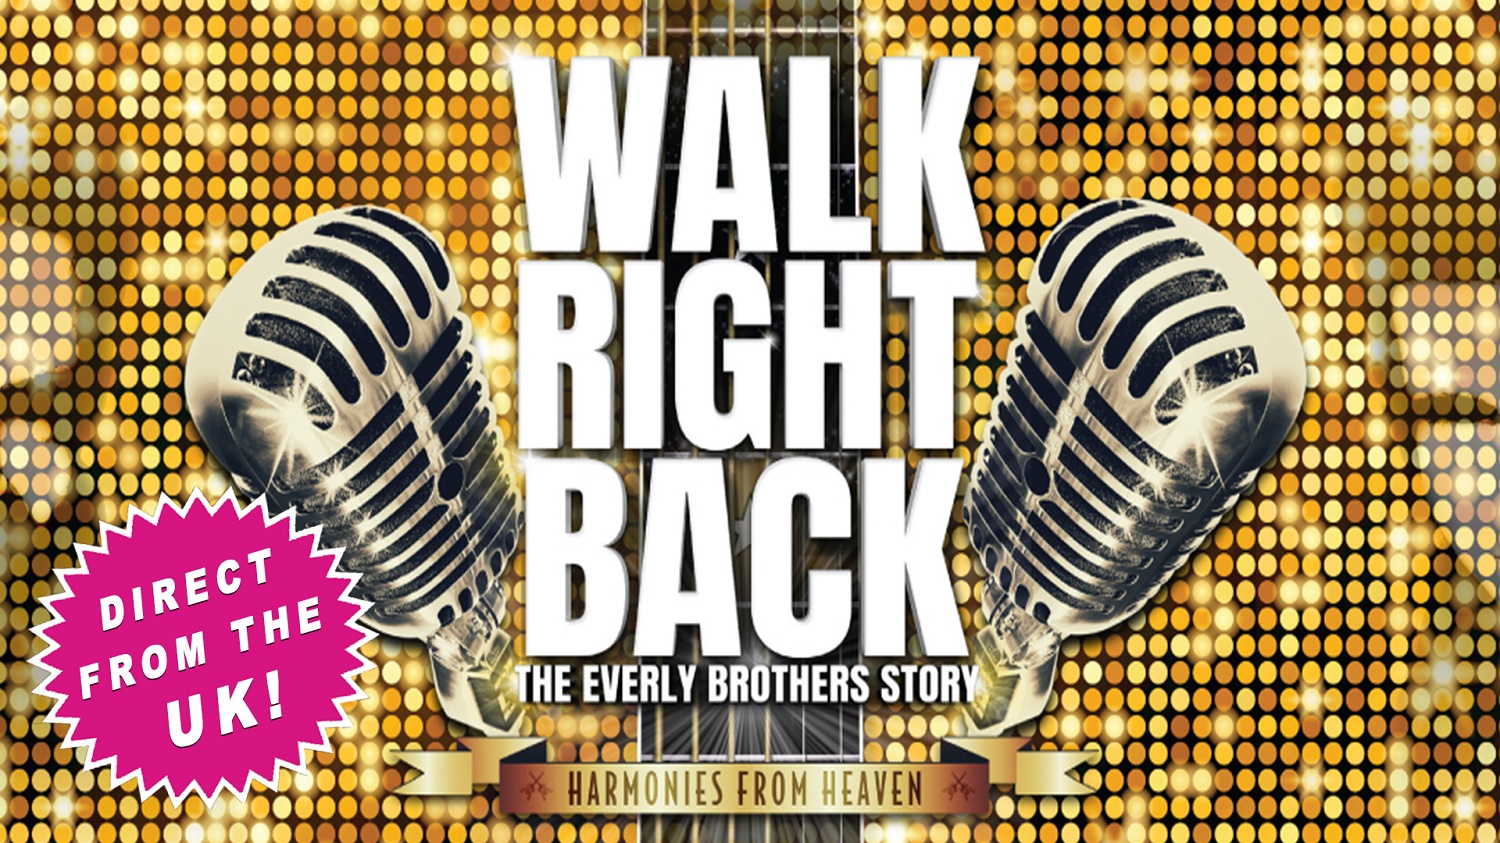 Image with two microphones on a gold sparkle background. The title of the show "Walk Right Back: The Everly Brothers Strory" is in white between the microphones.